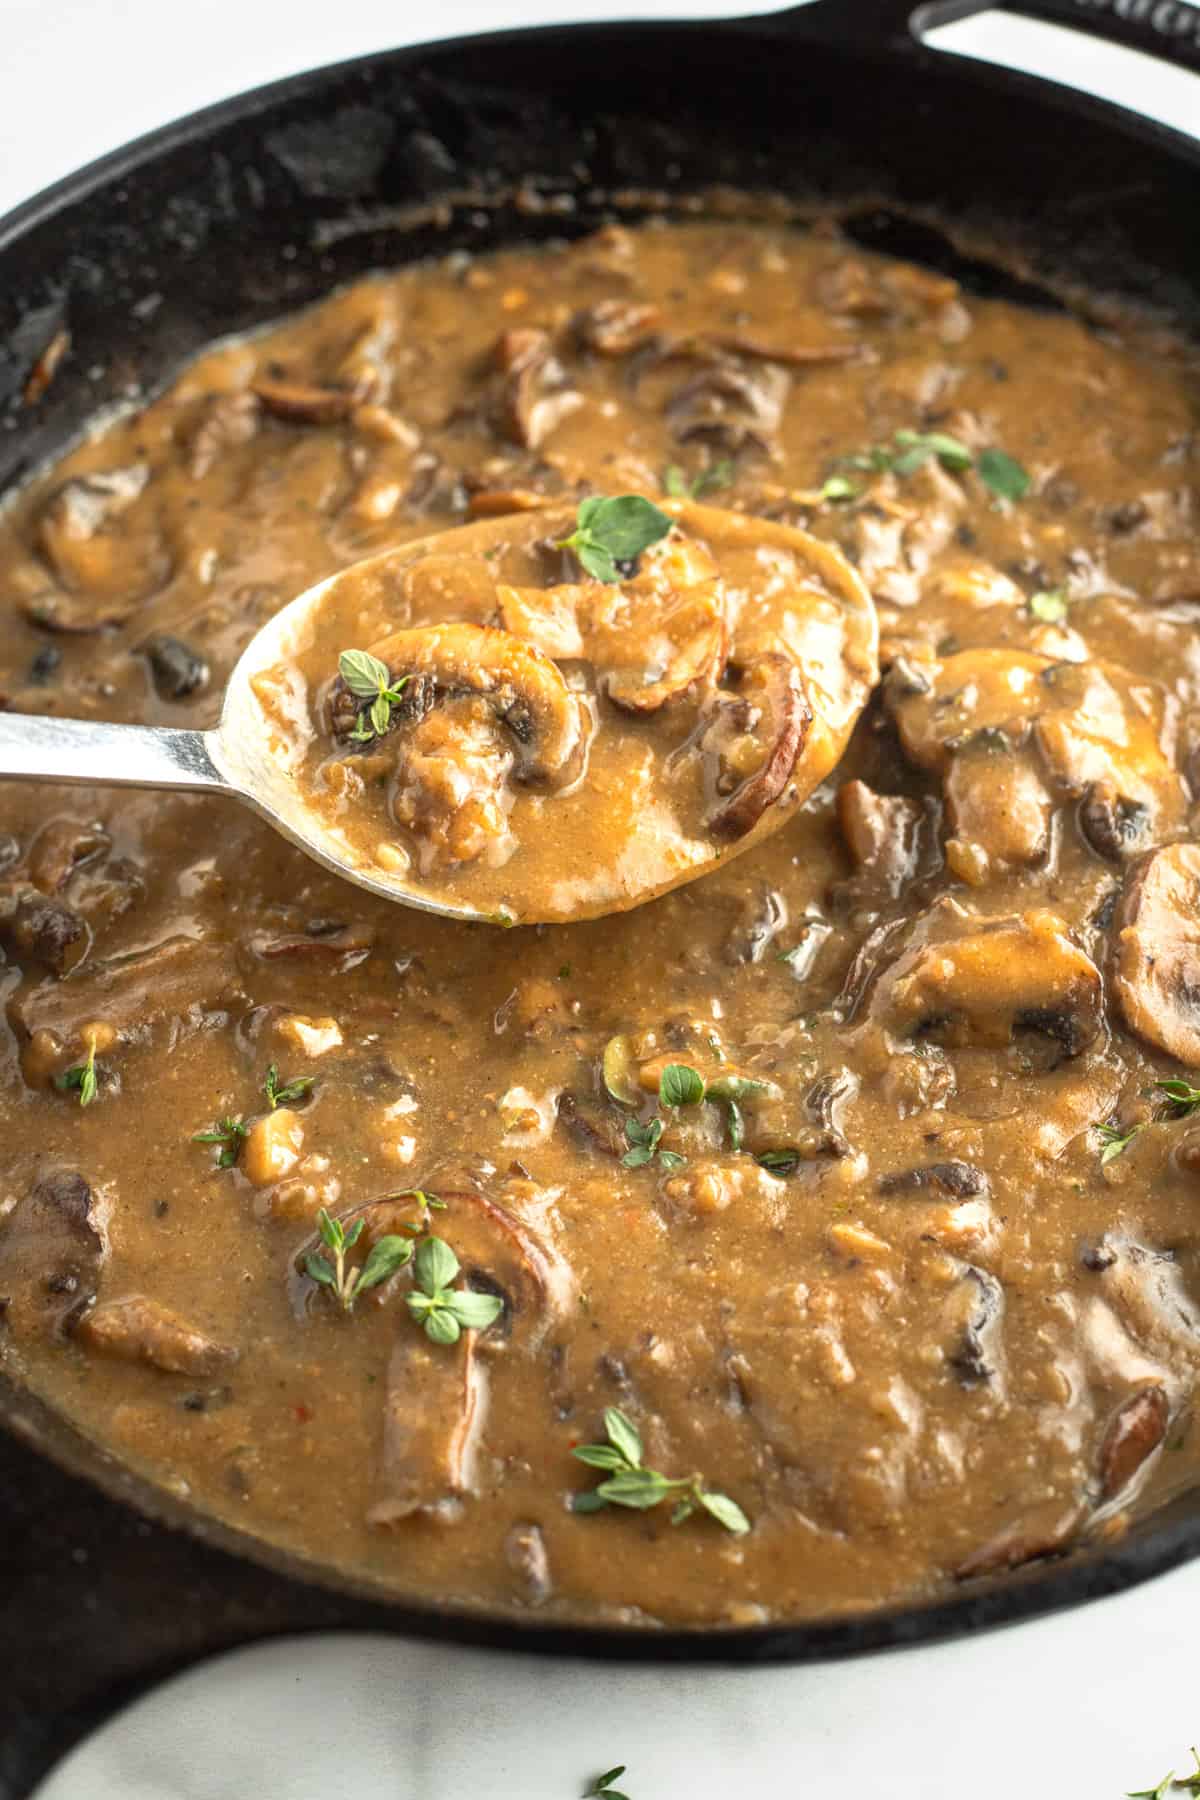 Spoonful of gravy being lifted over a skillet of mushroom gravy.